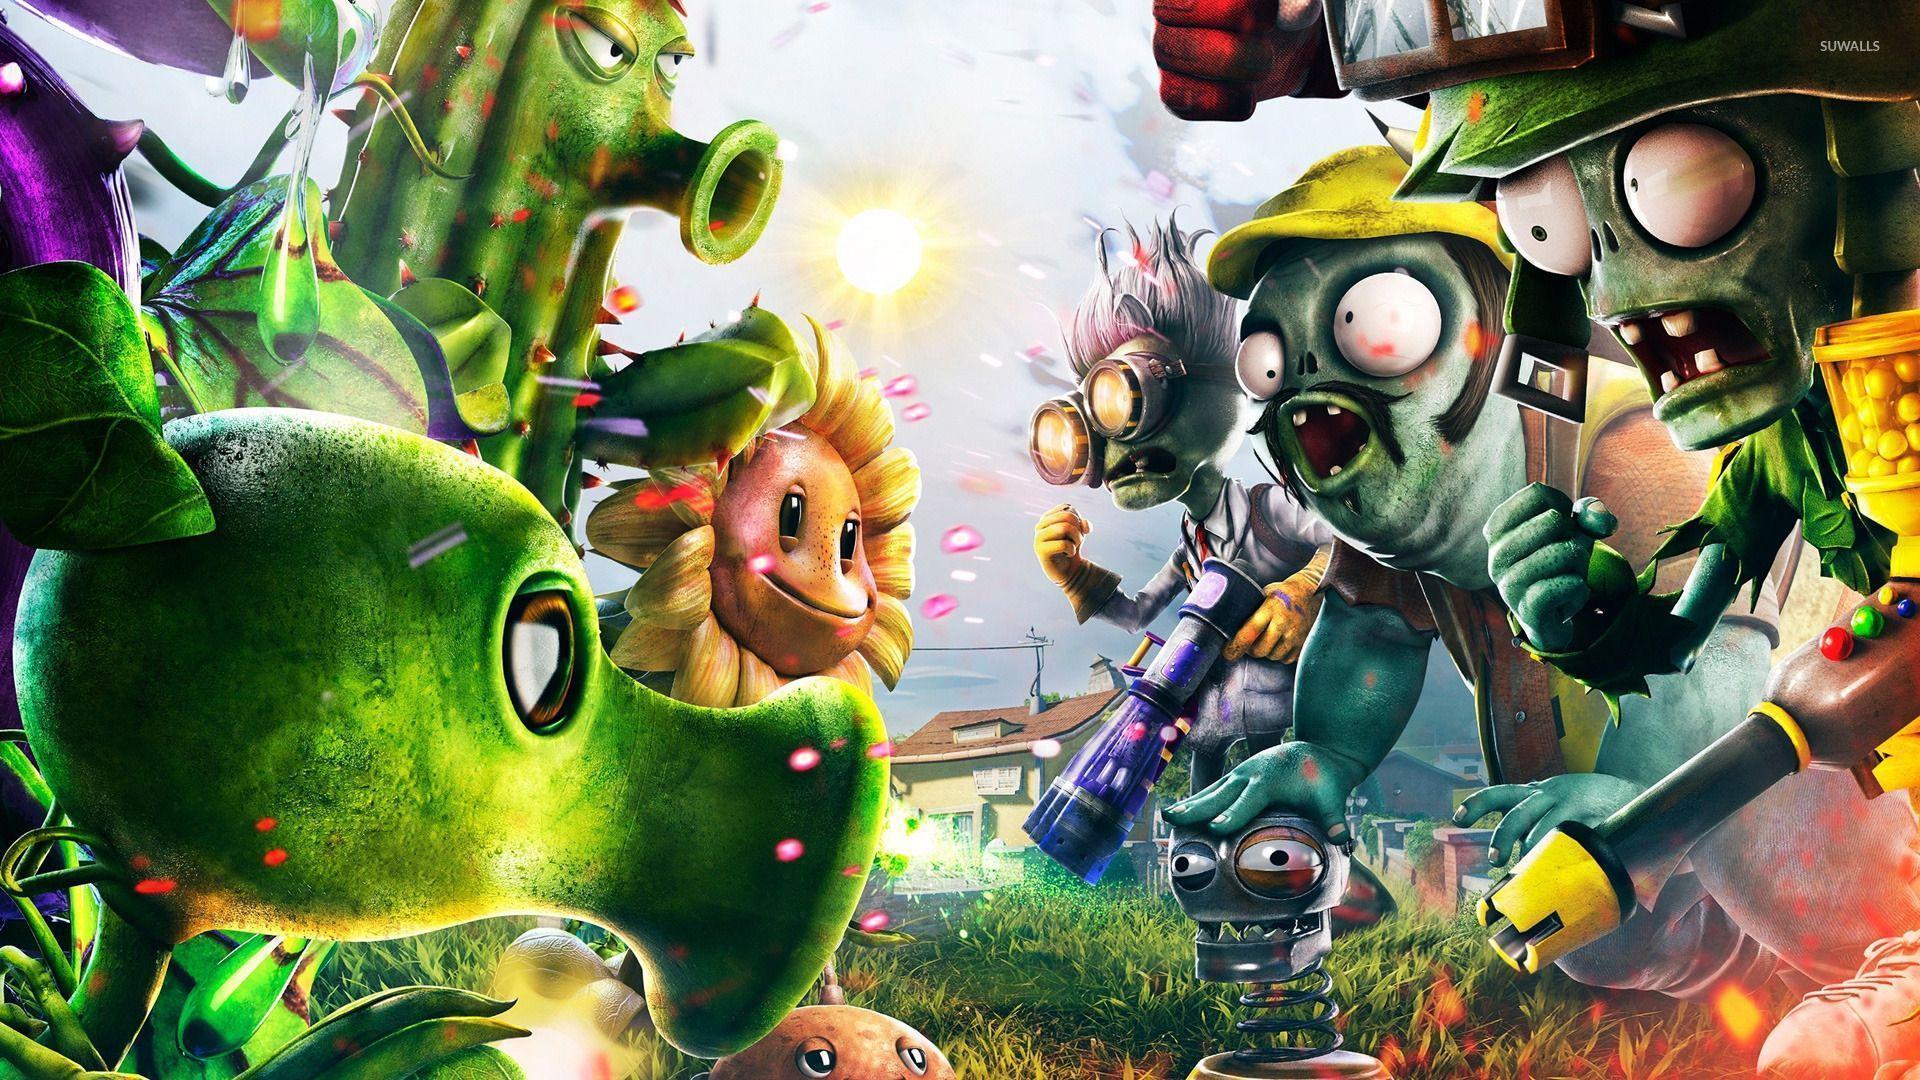 plants vs zombies for pc download